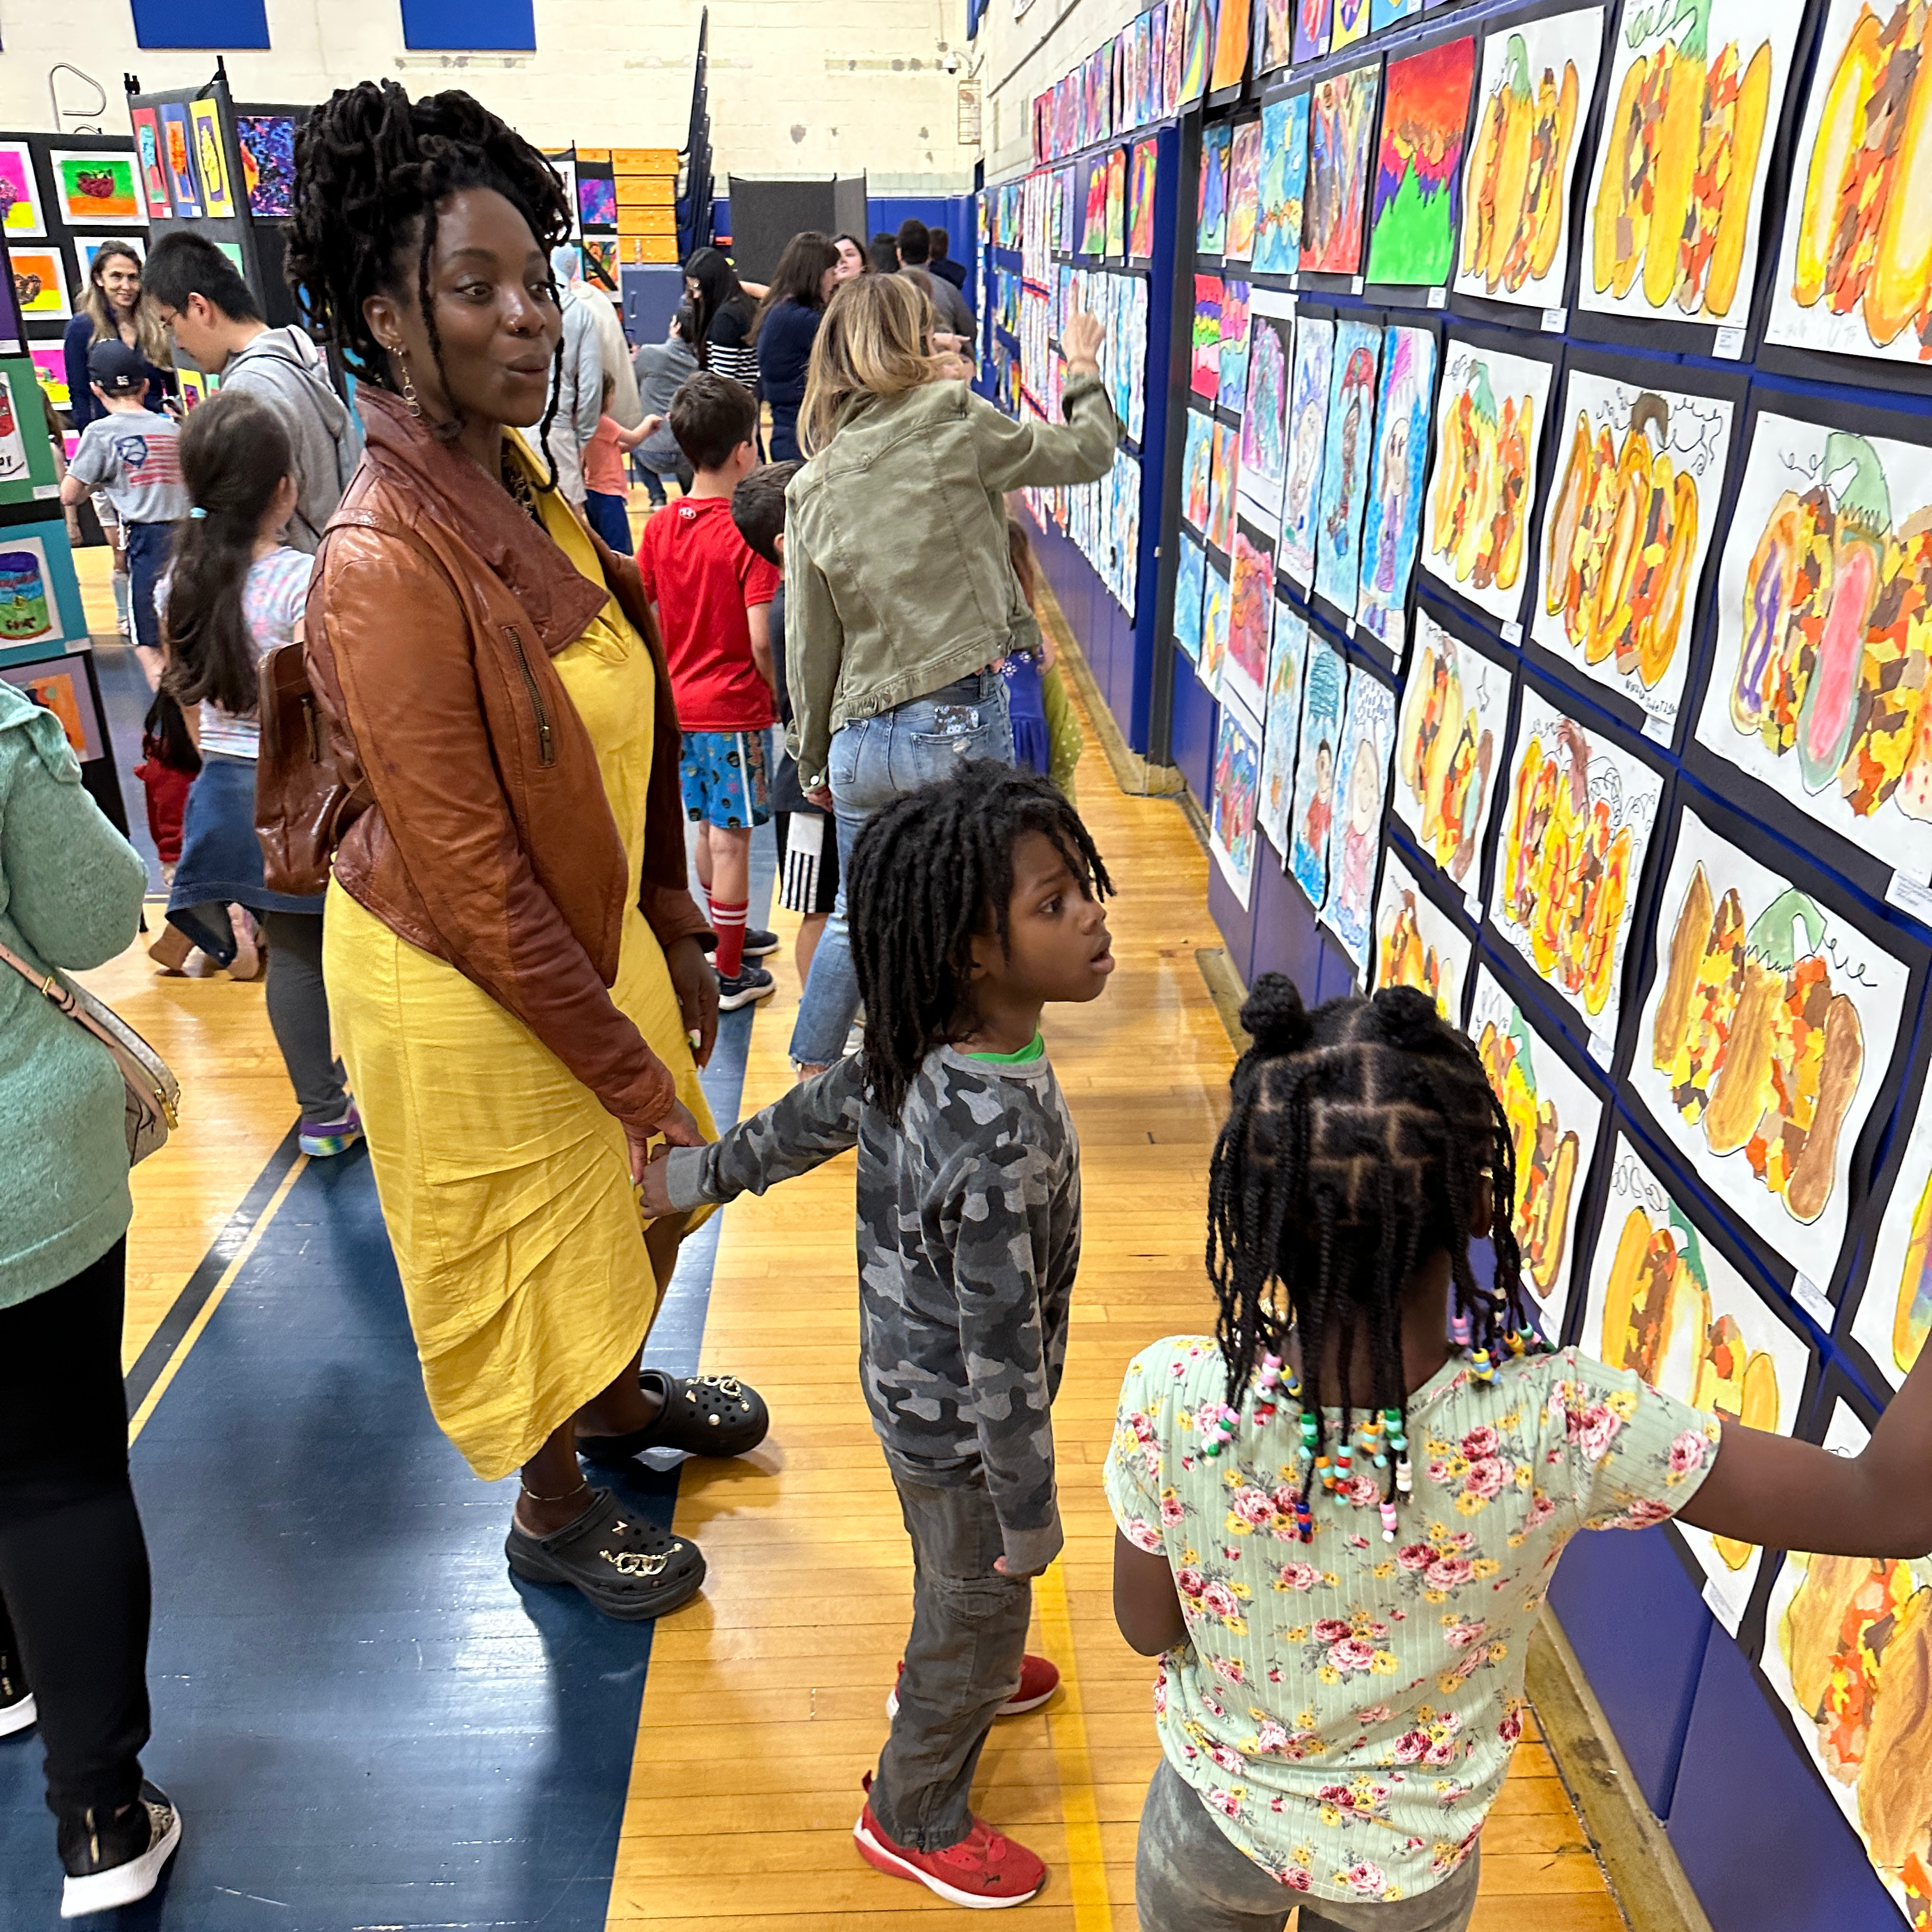 black female adult and 2 black girls looking at yellow artwork on wall